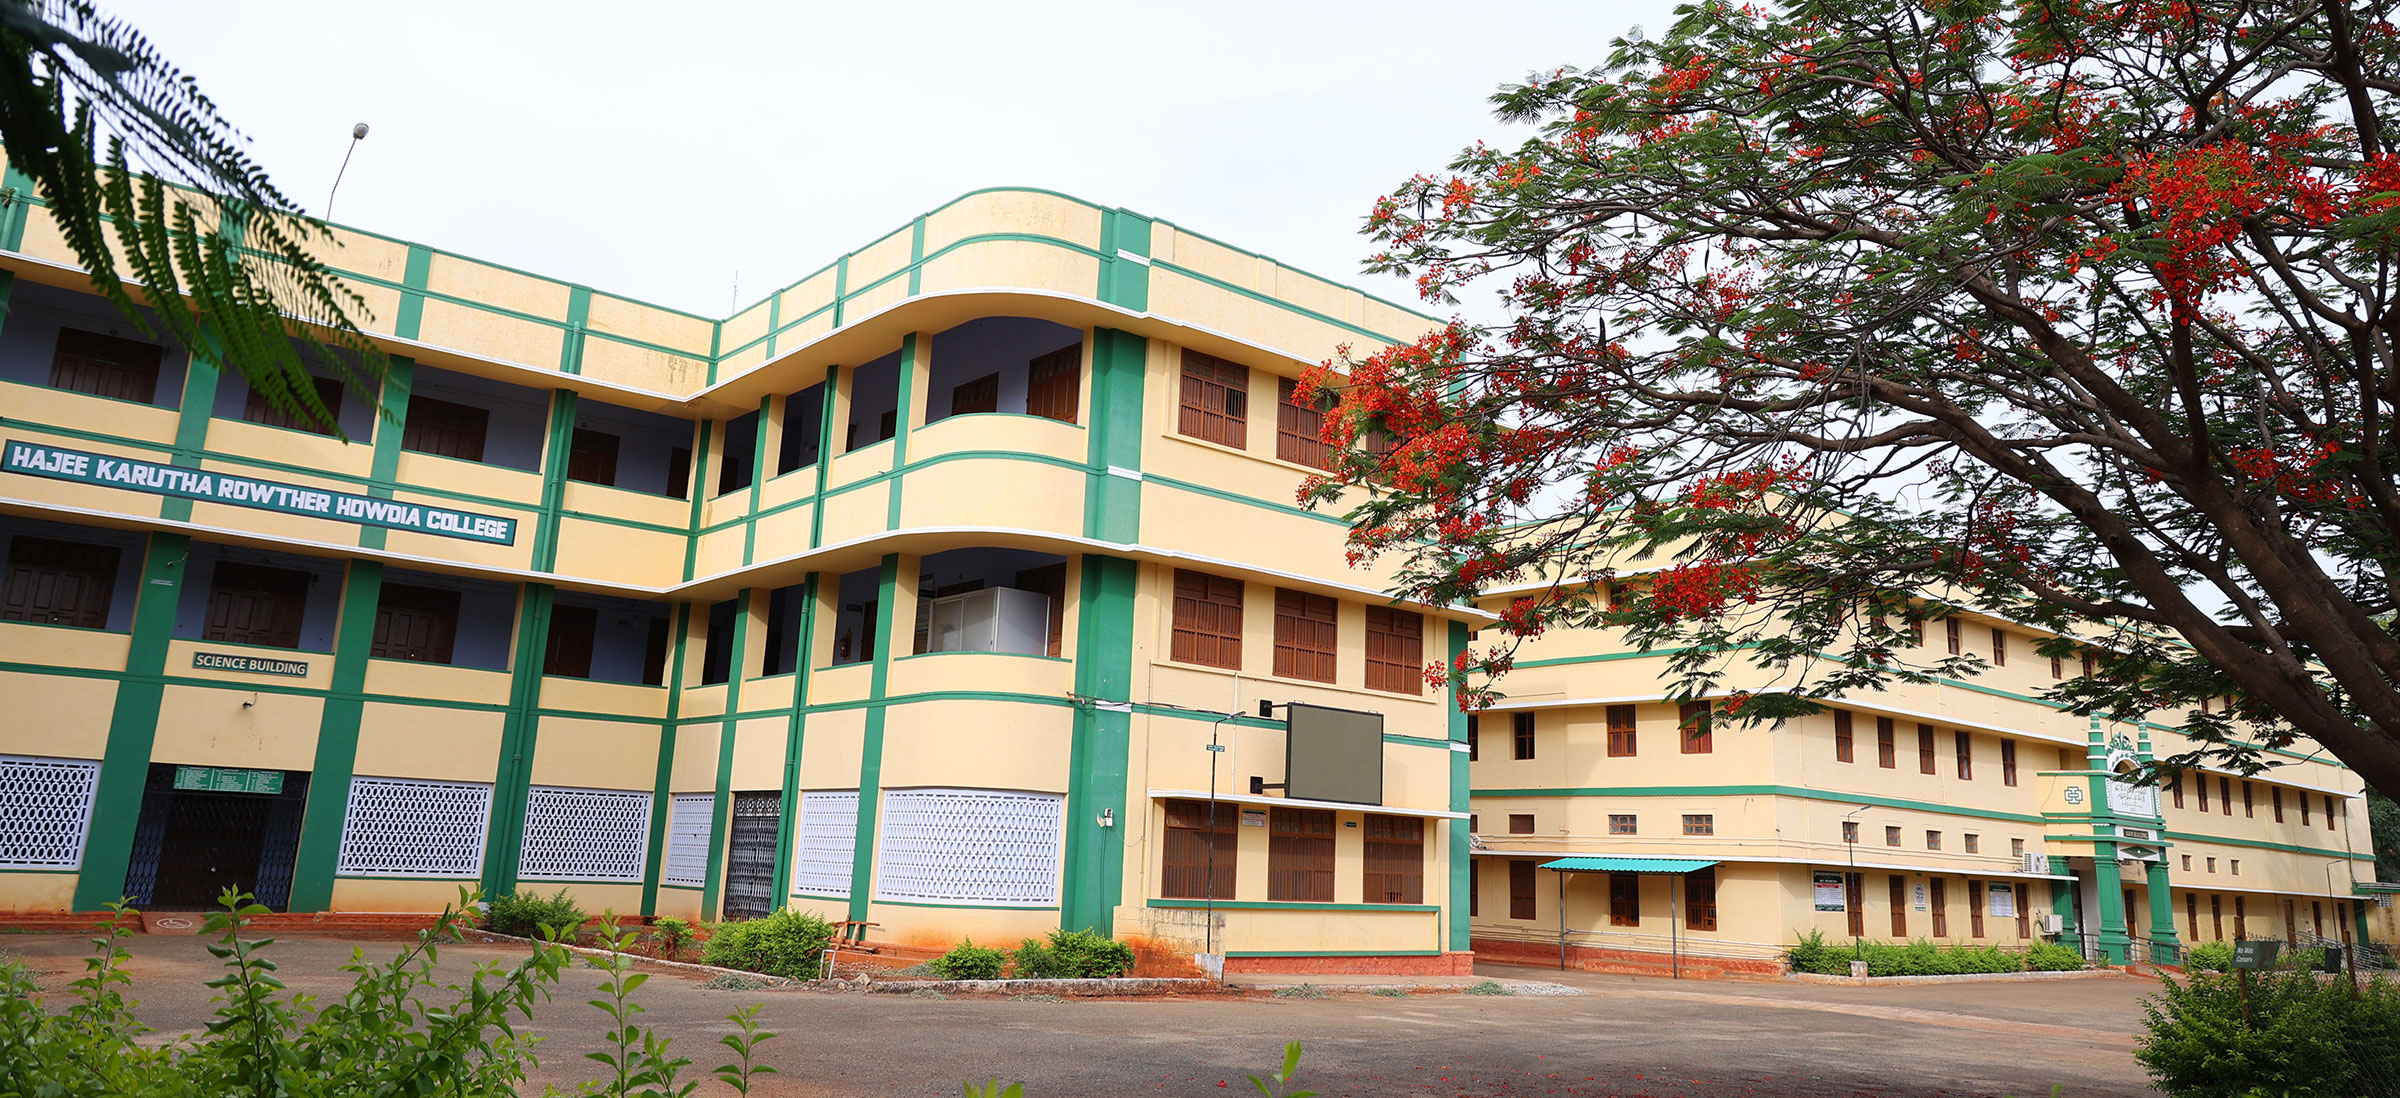 Hajee Karutha Rowther Howdia College – Education for all since 1956